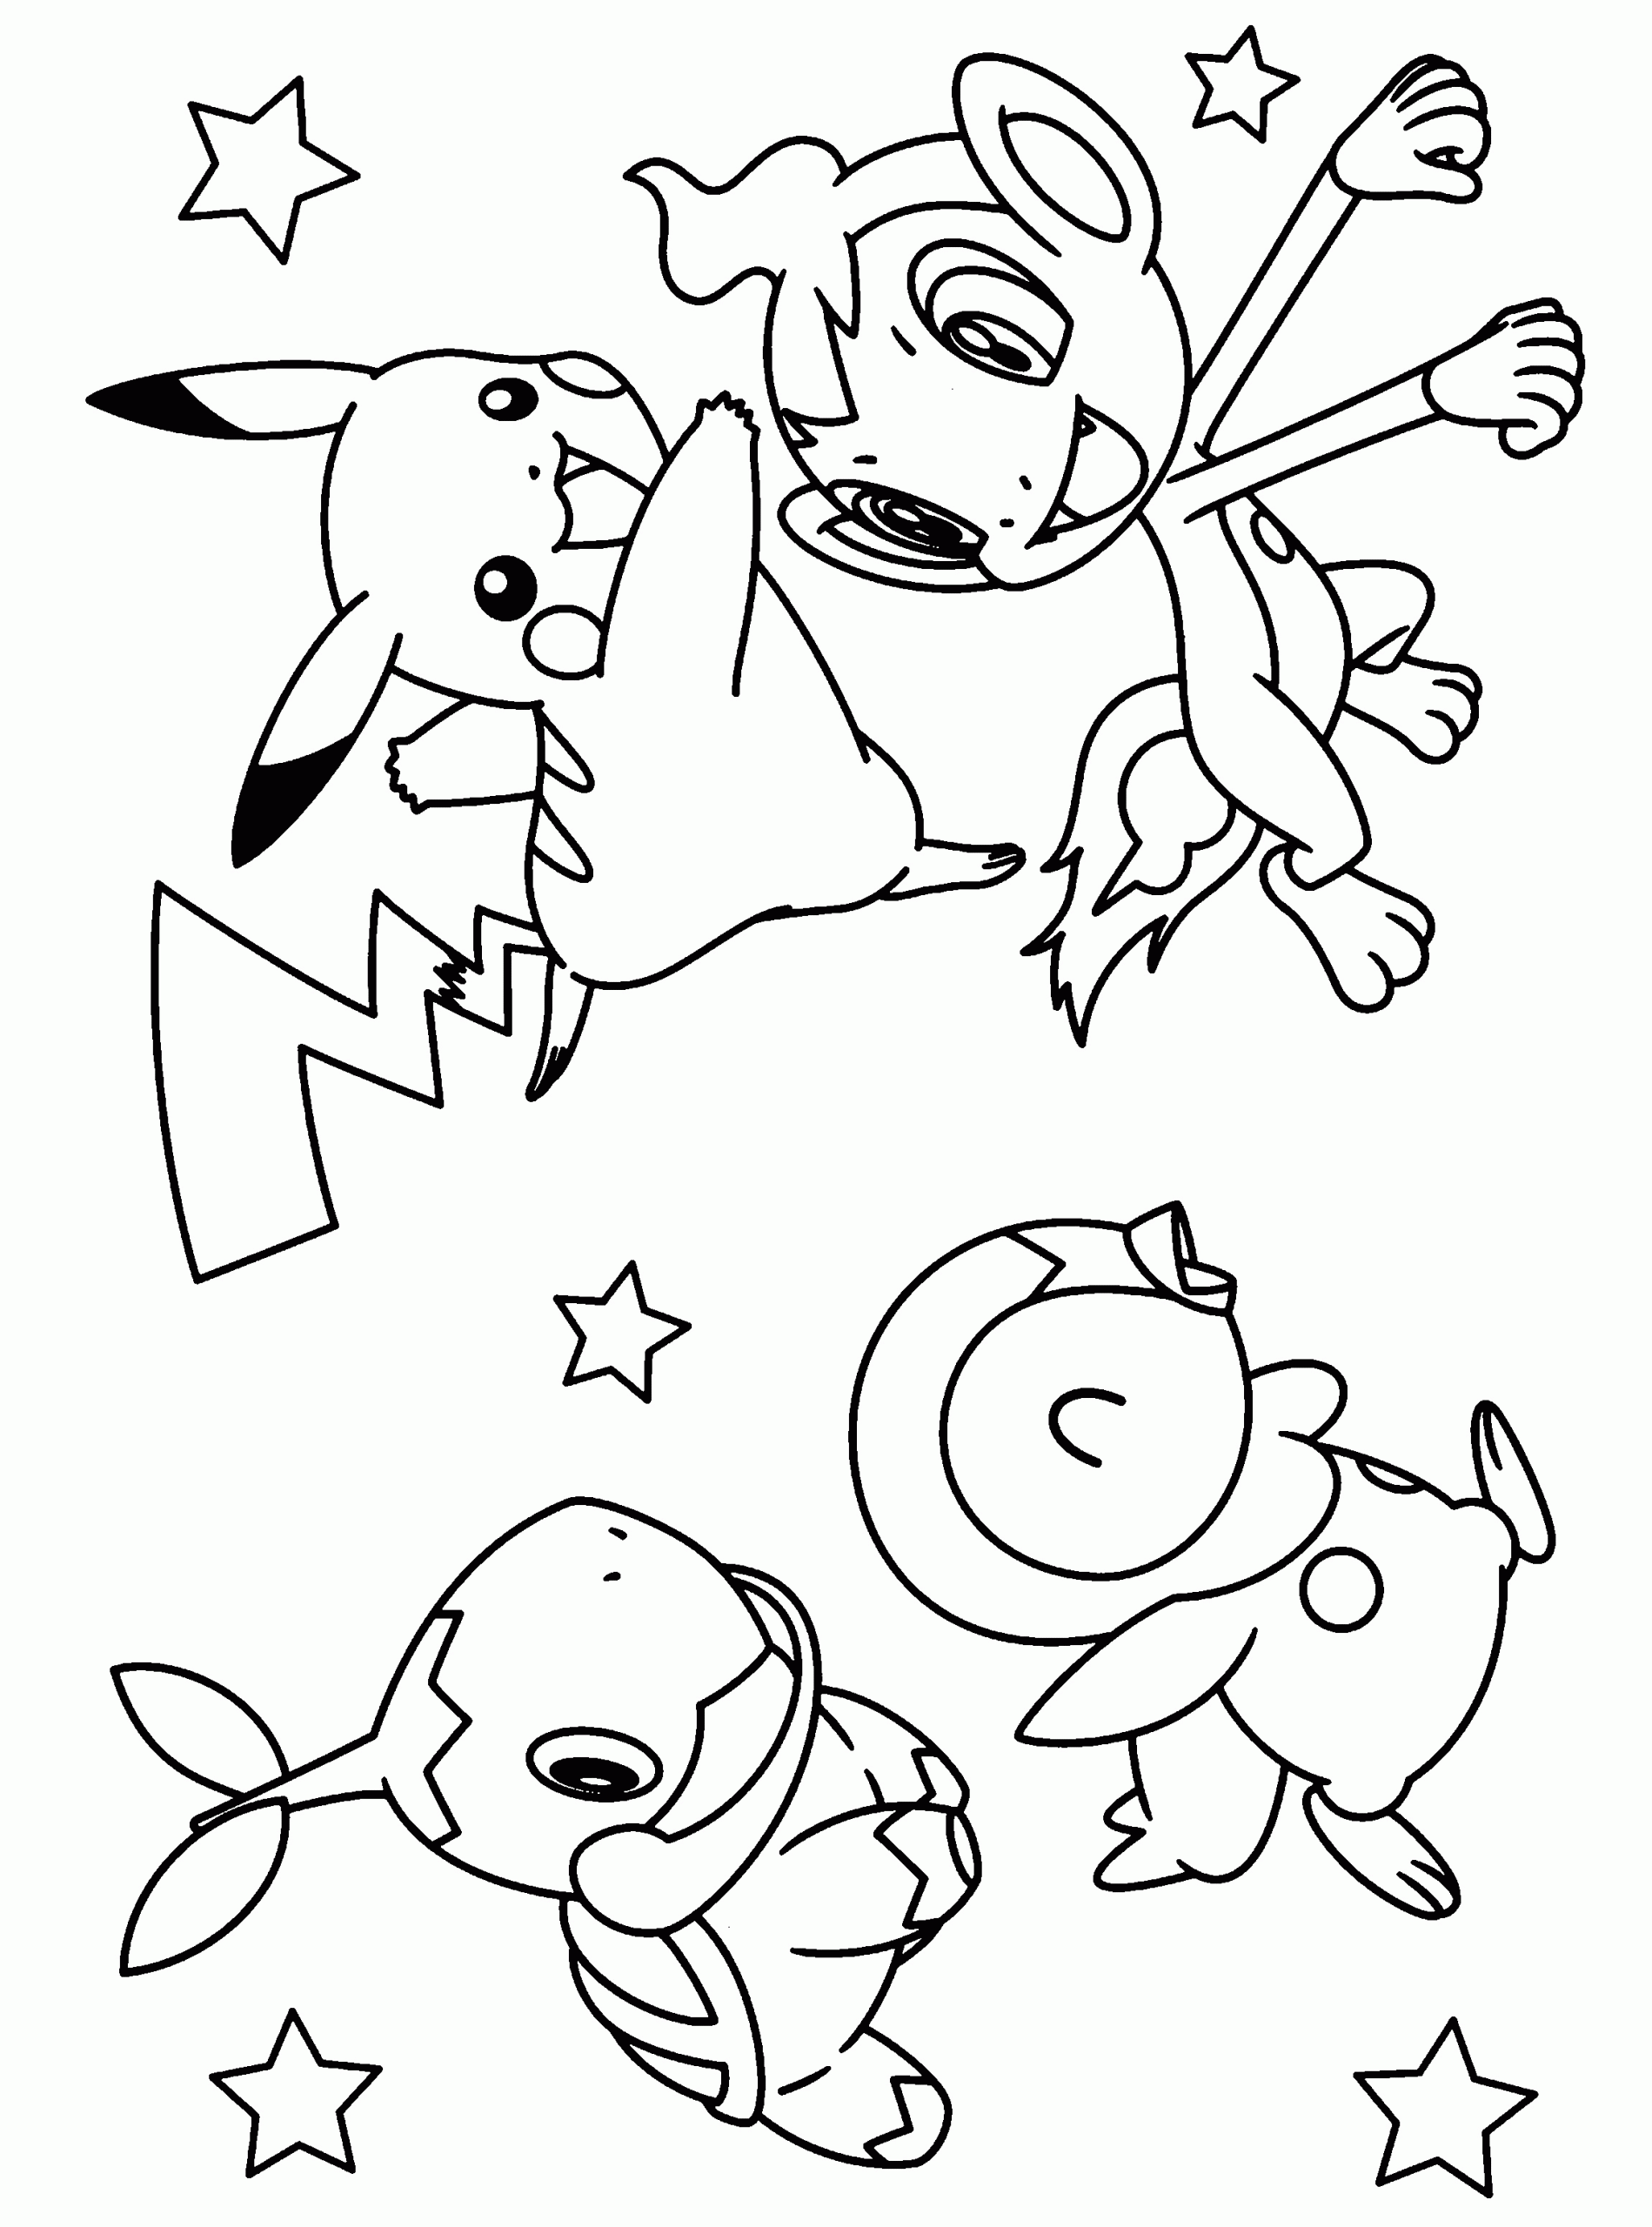 Printable Coloring Pages Pokemon
 55 Pokemon Coloring Pages For Kids